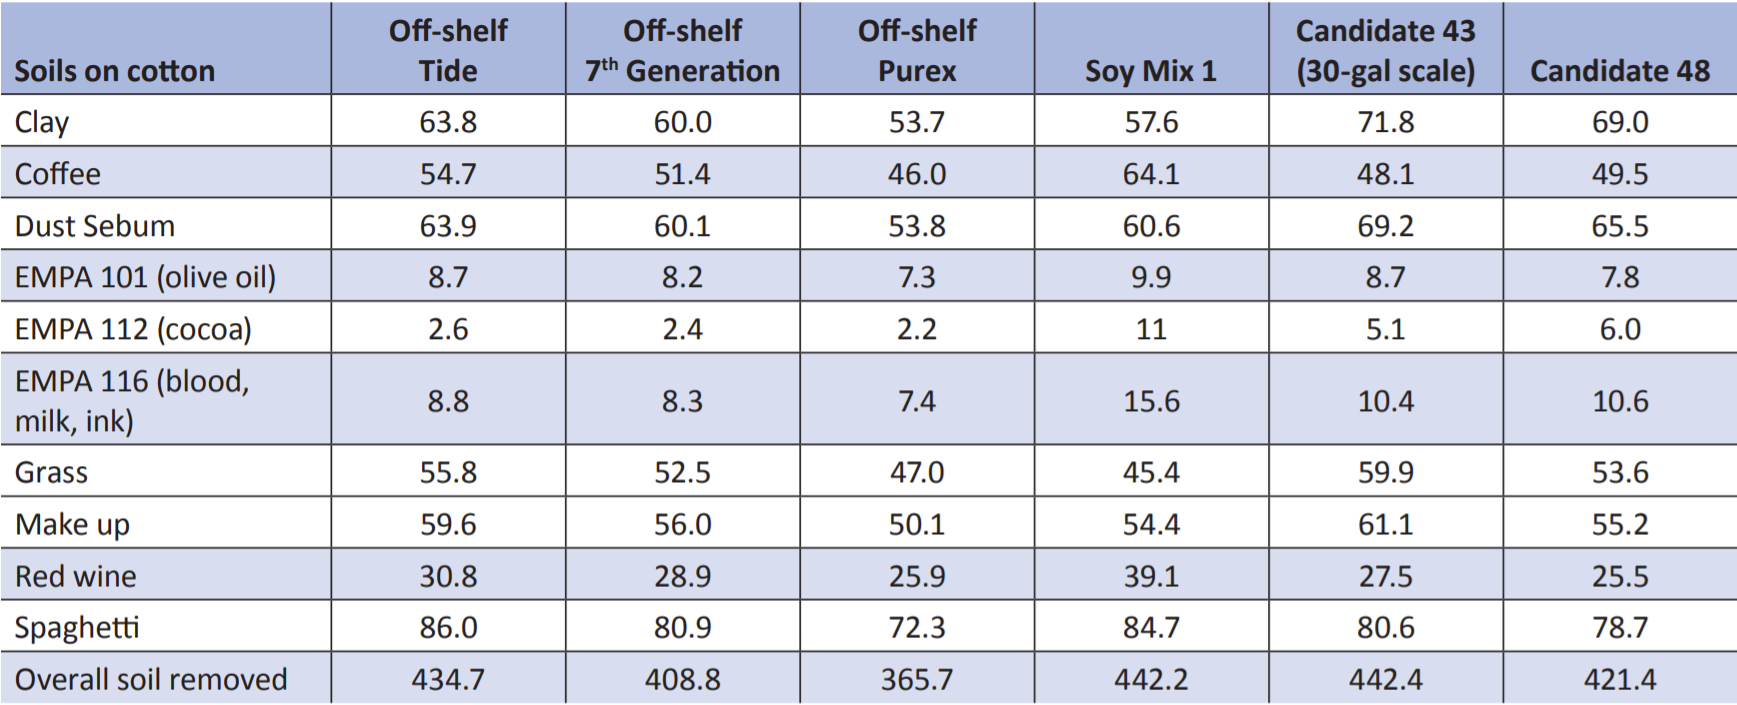 TABLE 1. Comparing stain lifting ability of surfactants synthesized from high-oleic (soy mix 1, candidate 43) and conventional (candidate 48) soybean oil with name brand products currently on the market. Source:Battelle 